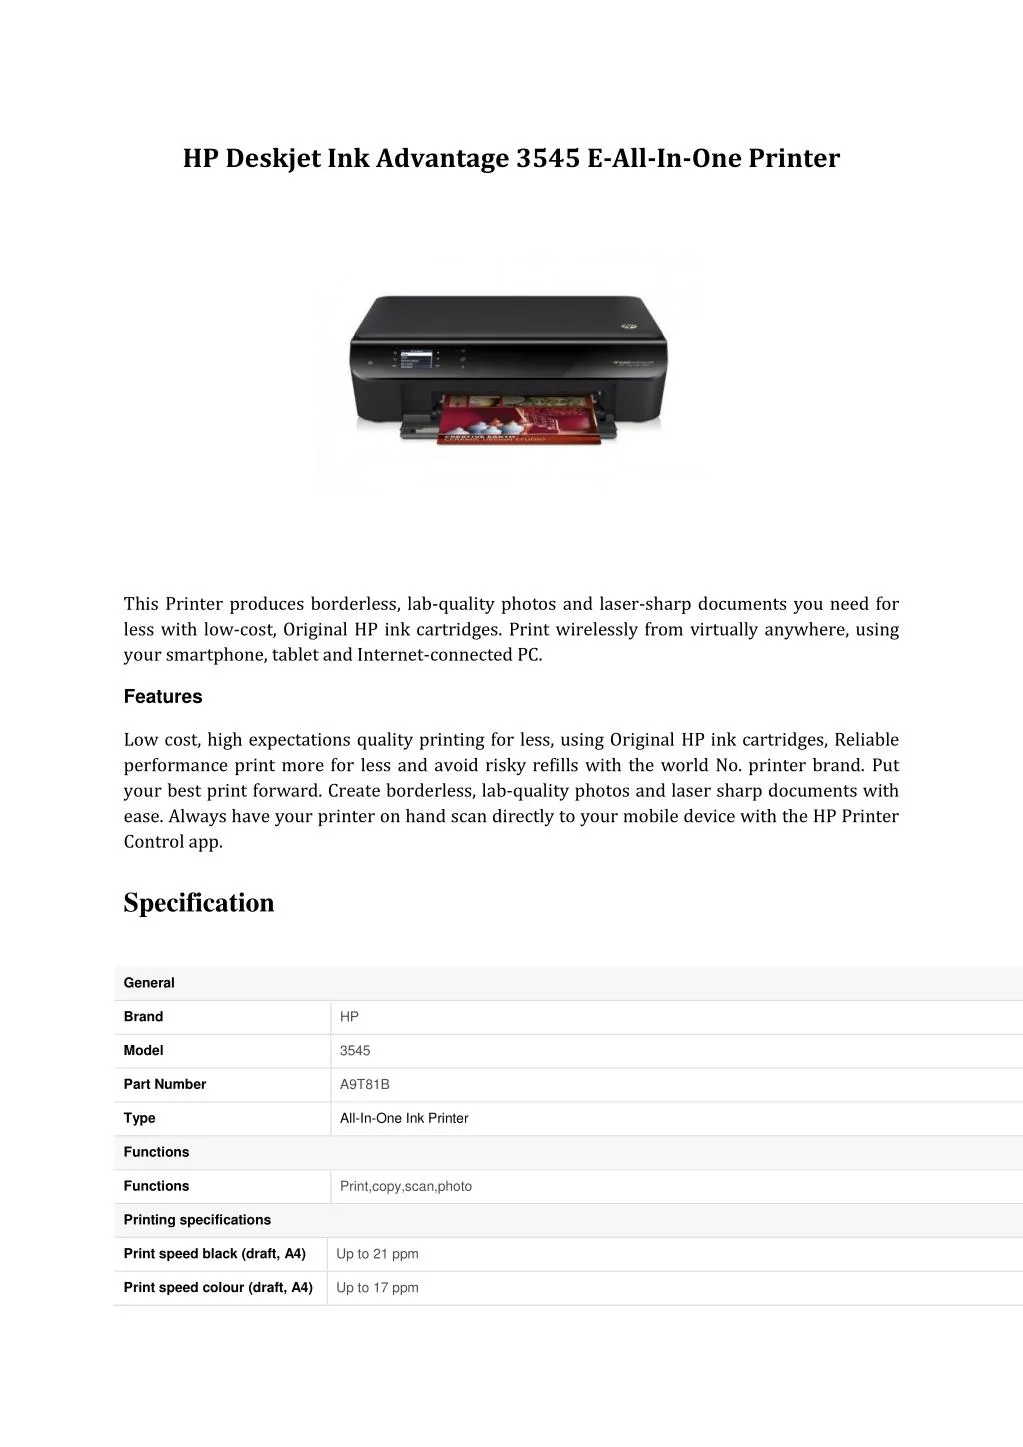 How To Install the HP DeskJet 1510 Printer?, by 123-hp-com-support